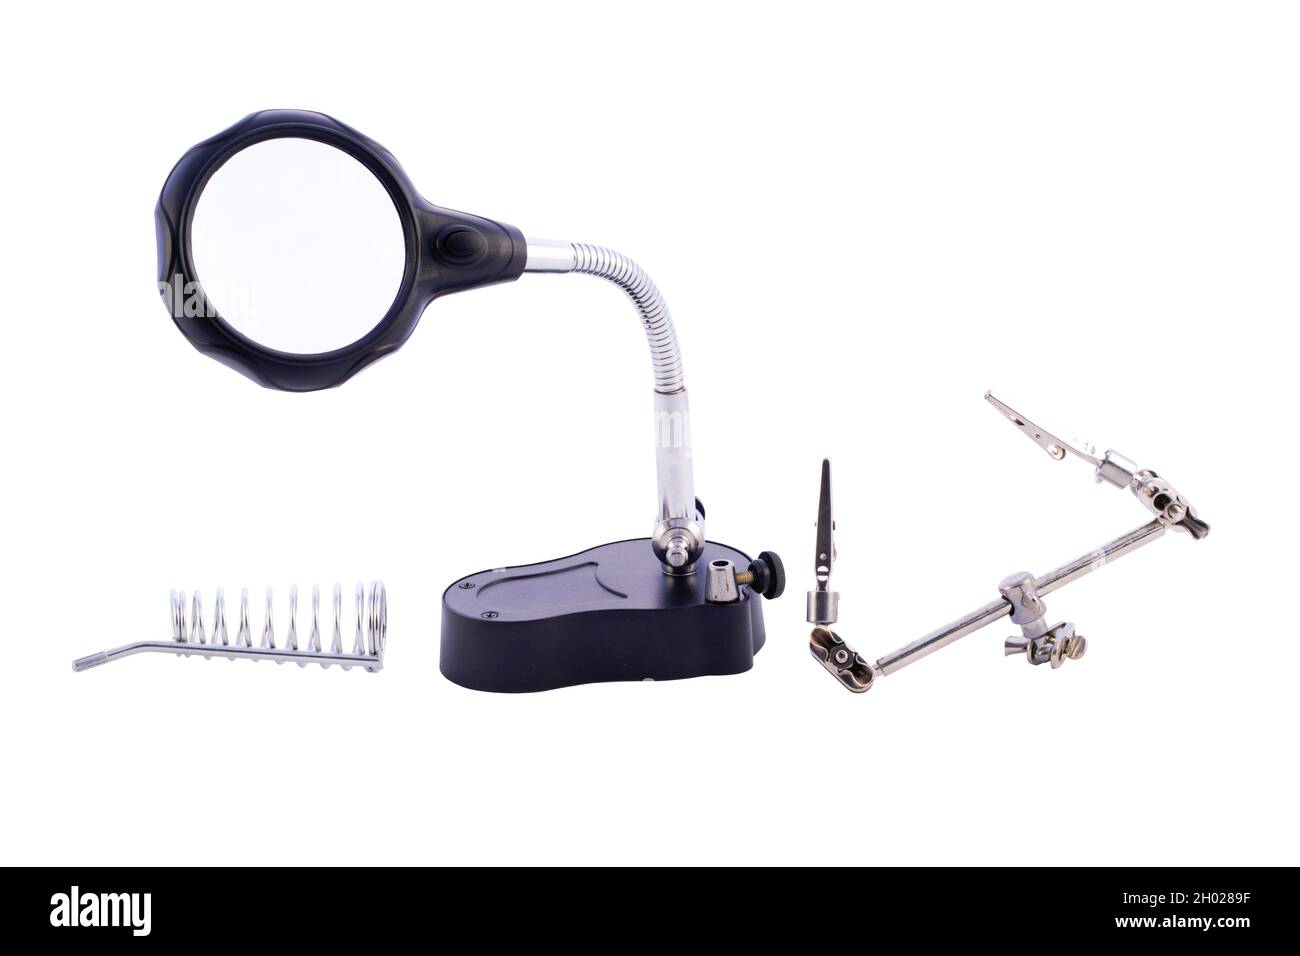 welding magnifier with tools on white background Stock Photo